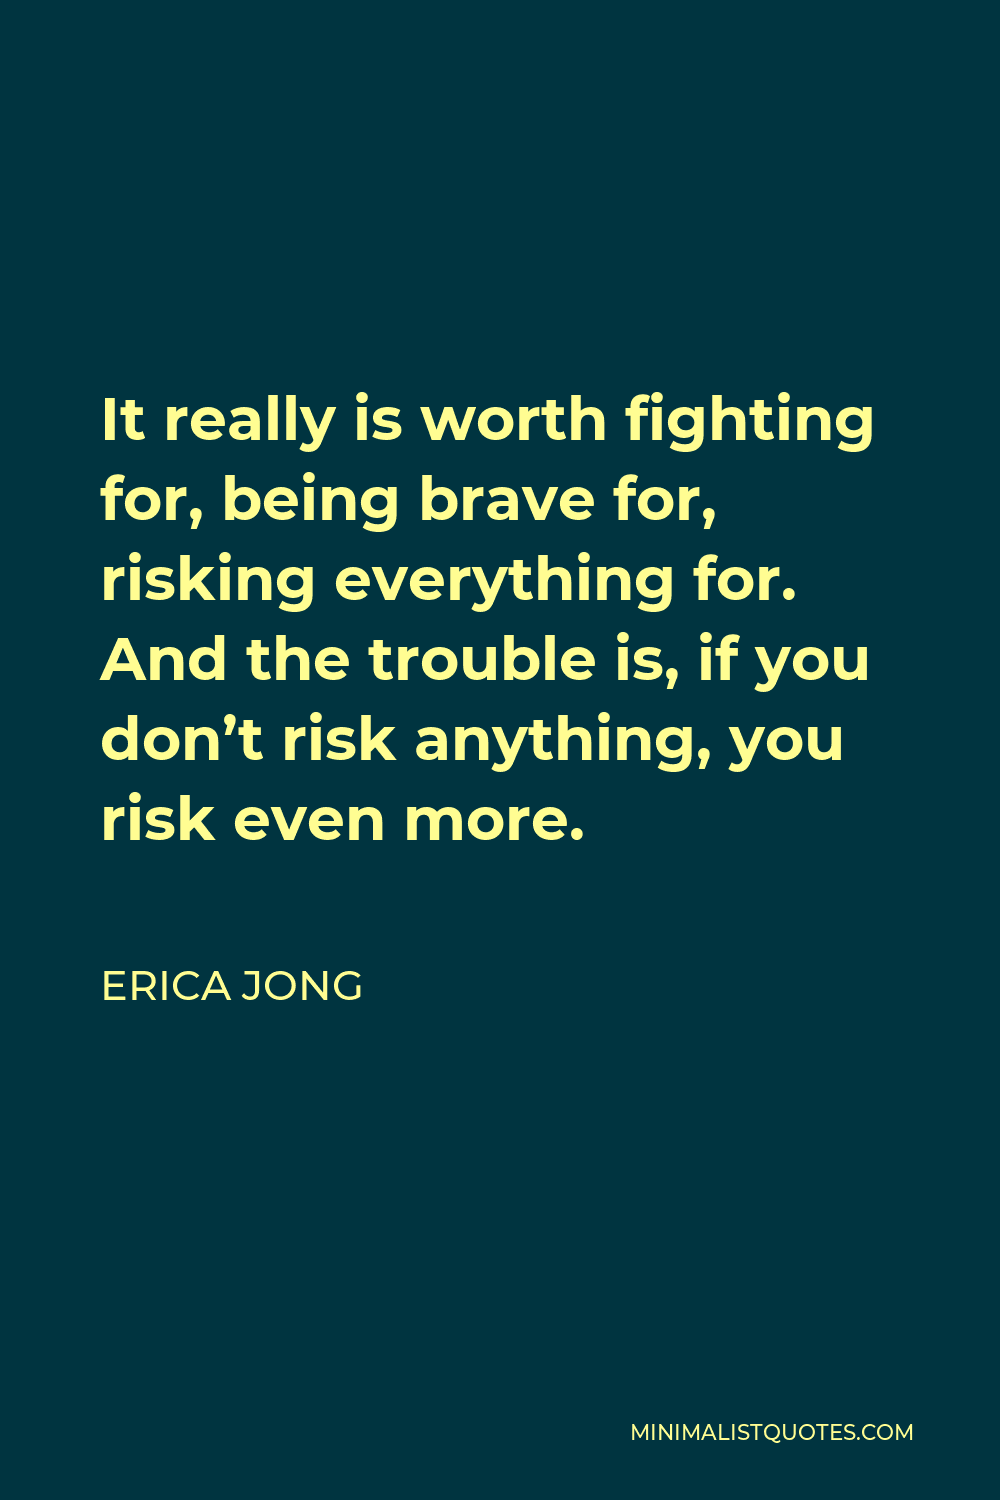 Erica Jong Quote - It really is worth fighting for, being brave for, risking everything for. And the trouble is, if you don’t risk anything, you risk even more.